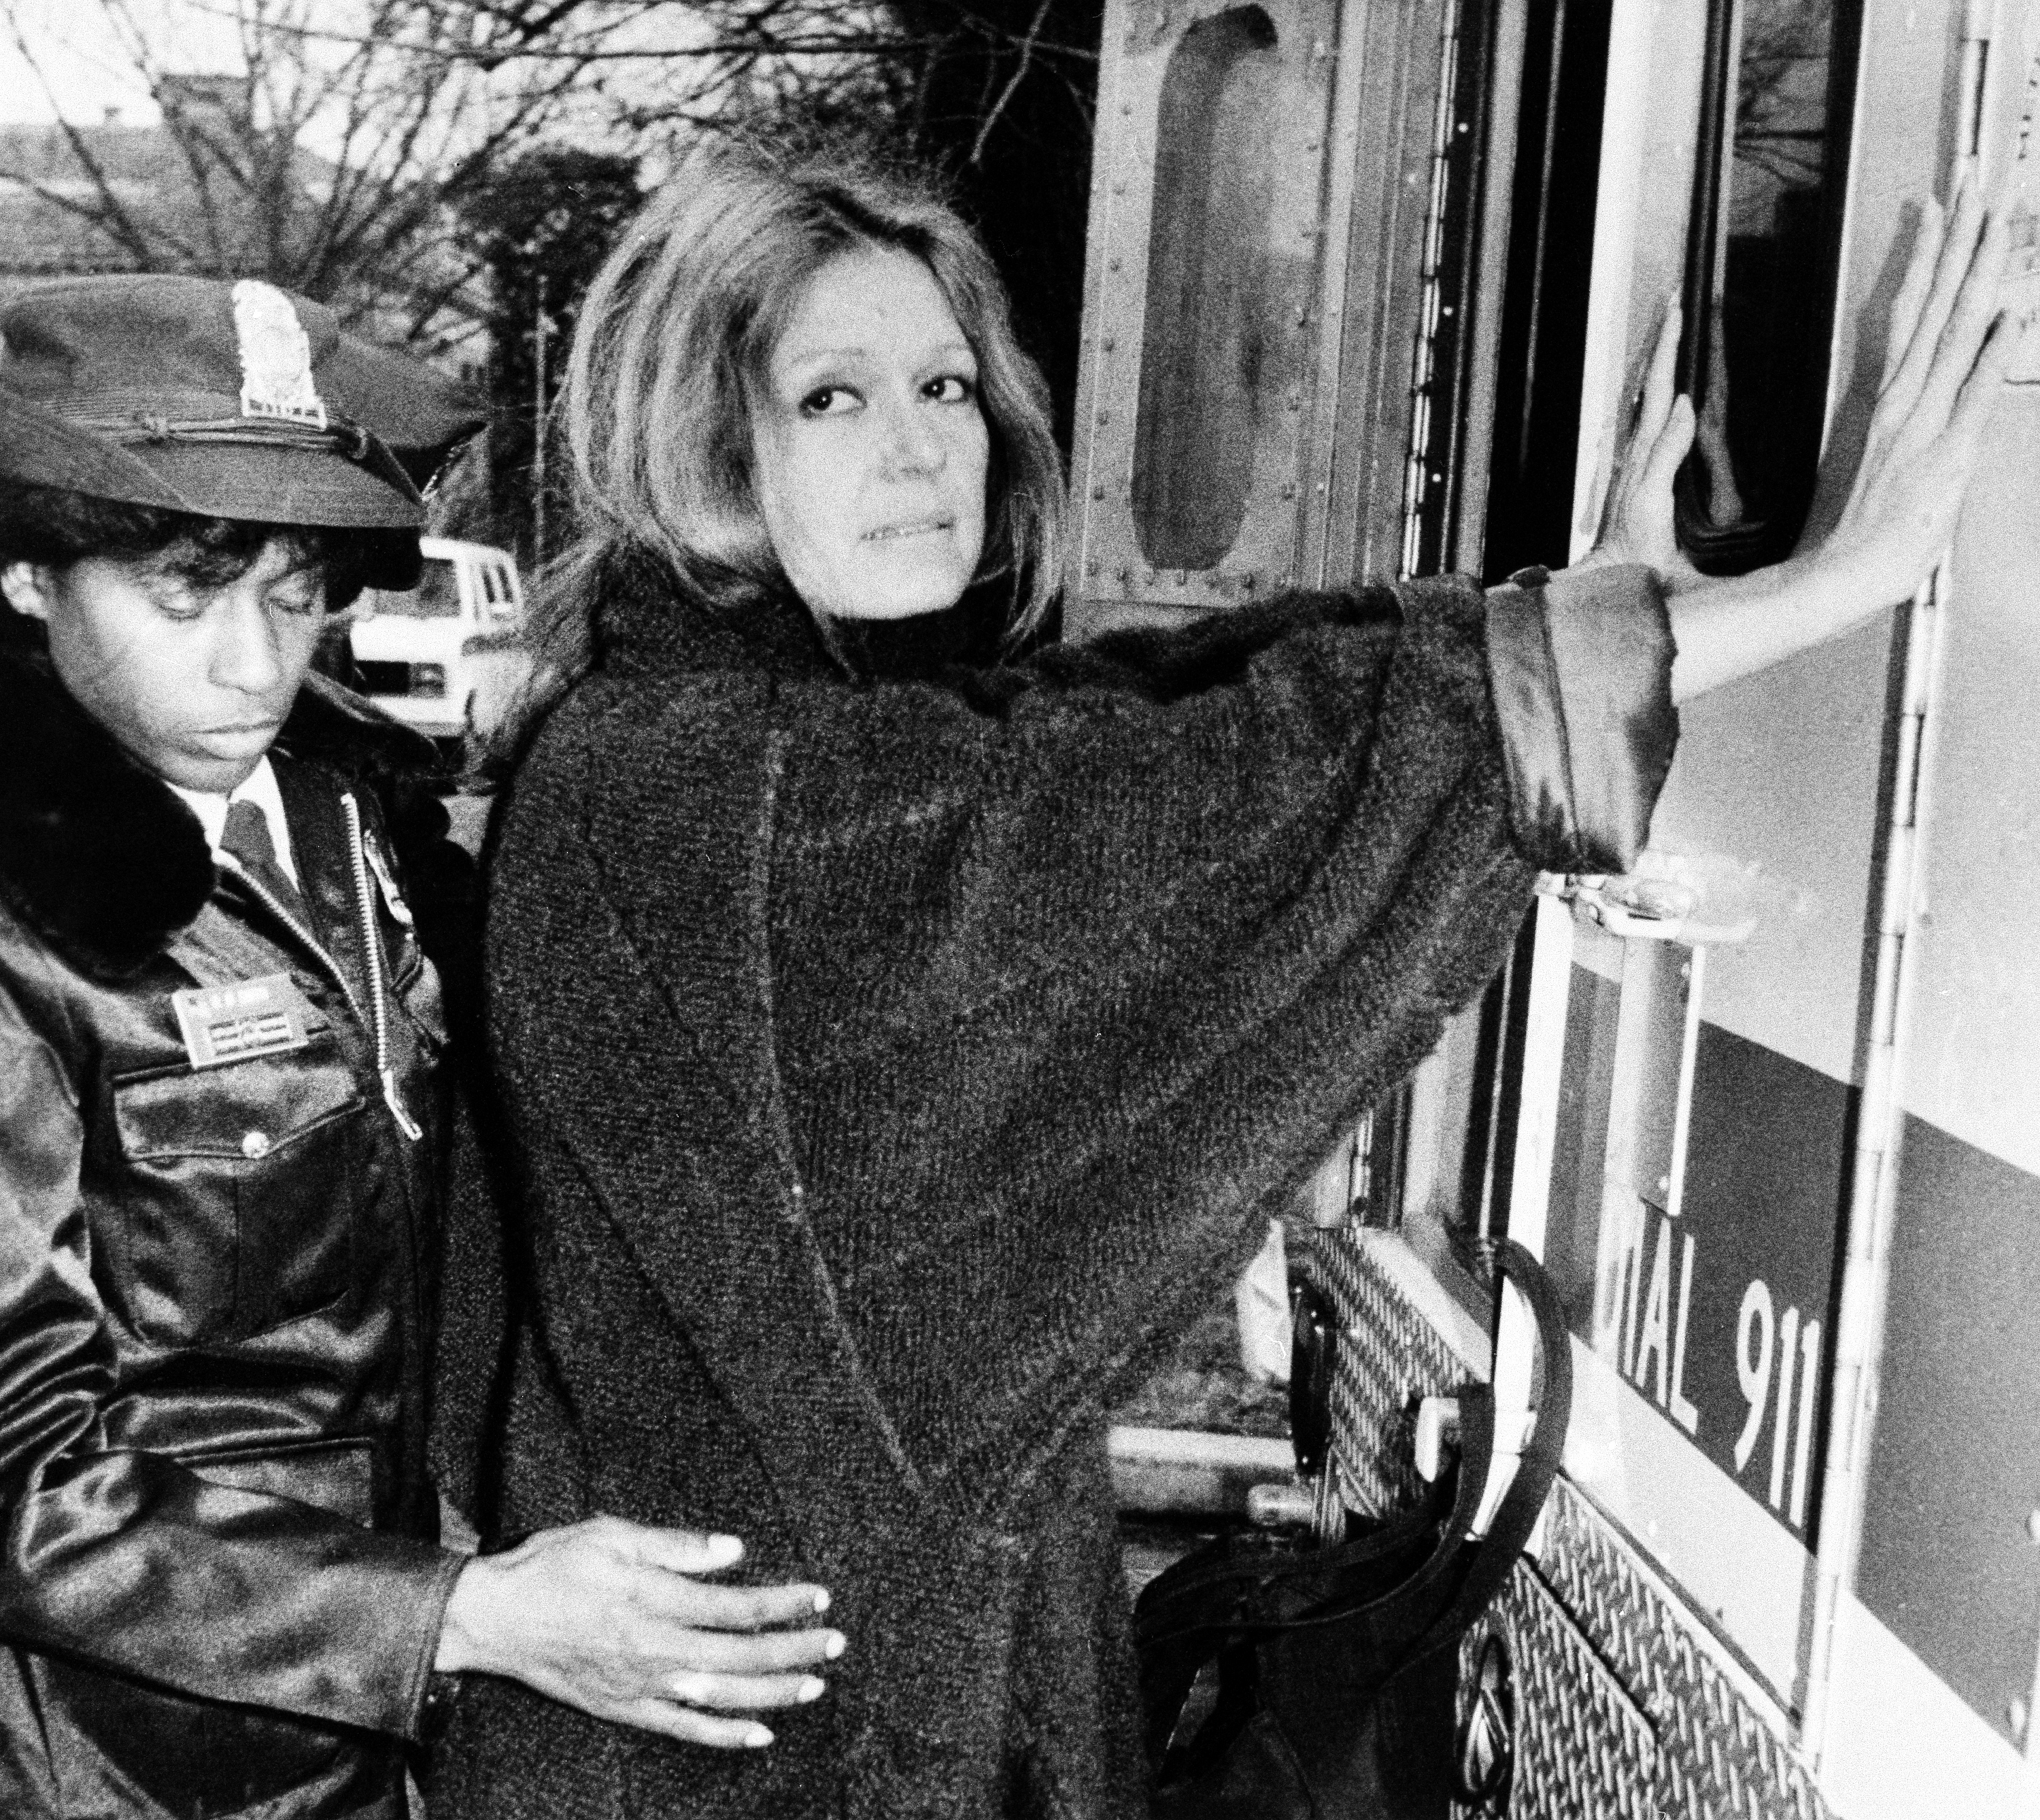 A uniformed officer arrests feminist Gloria Steinem during an anti-apartheid protest outside the South African Embassy in Washington, Dec. 19, 1984. (AP)